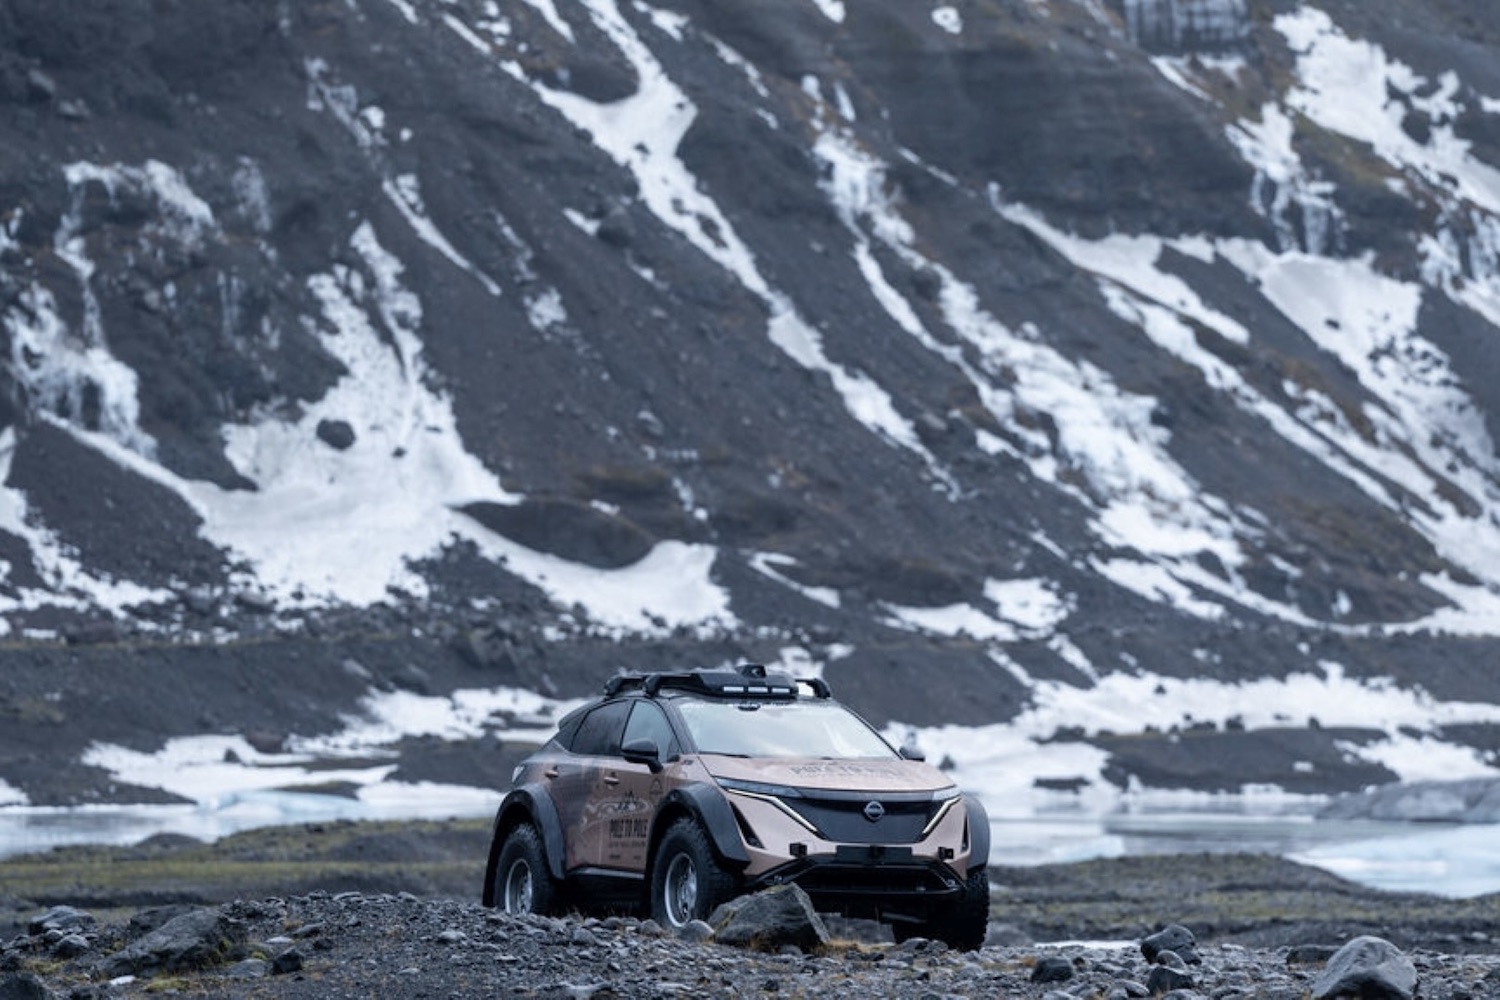 Far away shot of Nissan Ariya parked on rocky terrain with snow and mountains in the back.